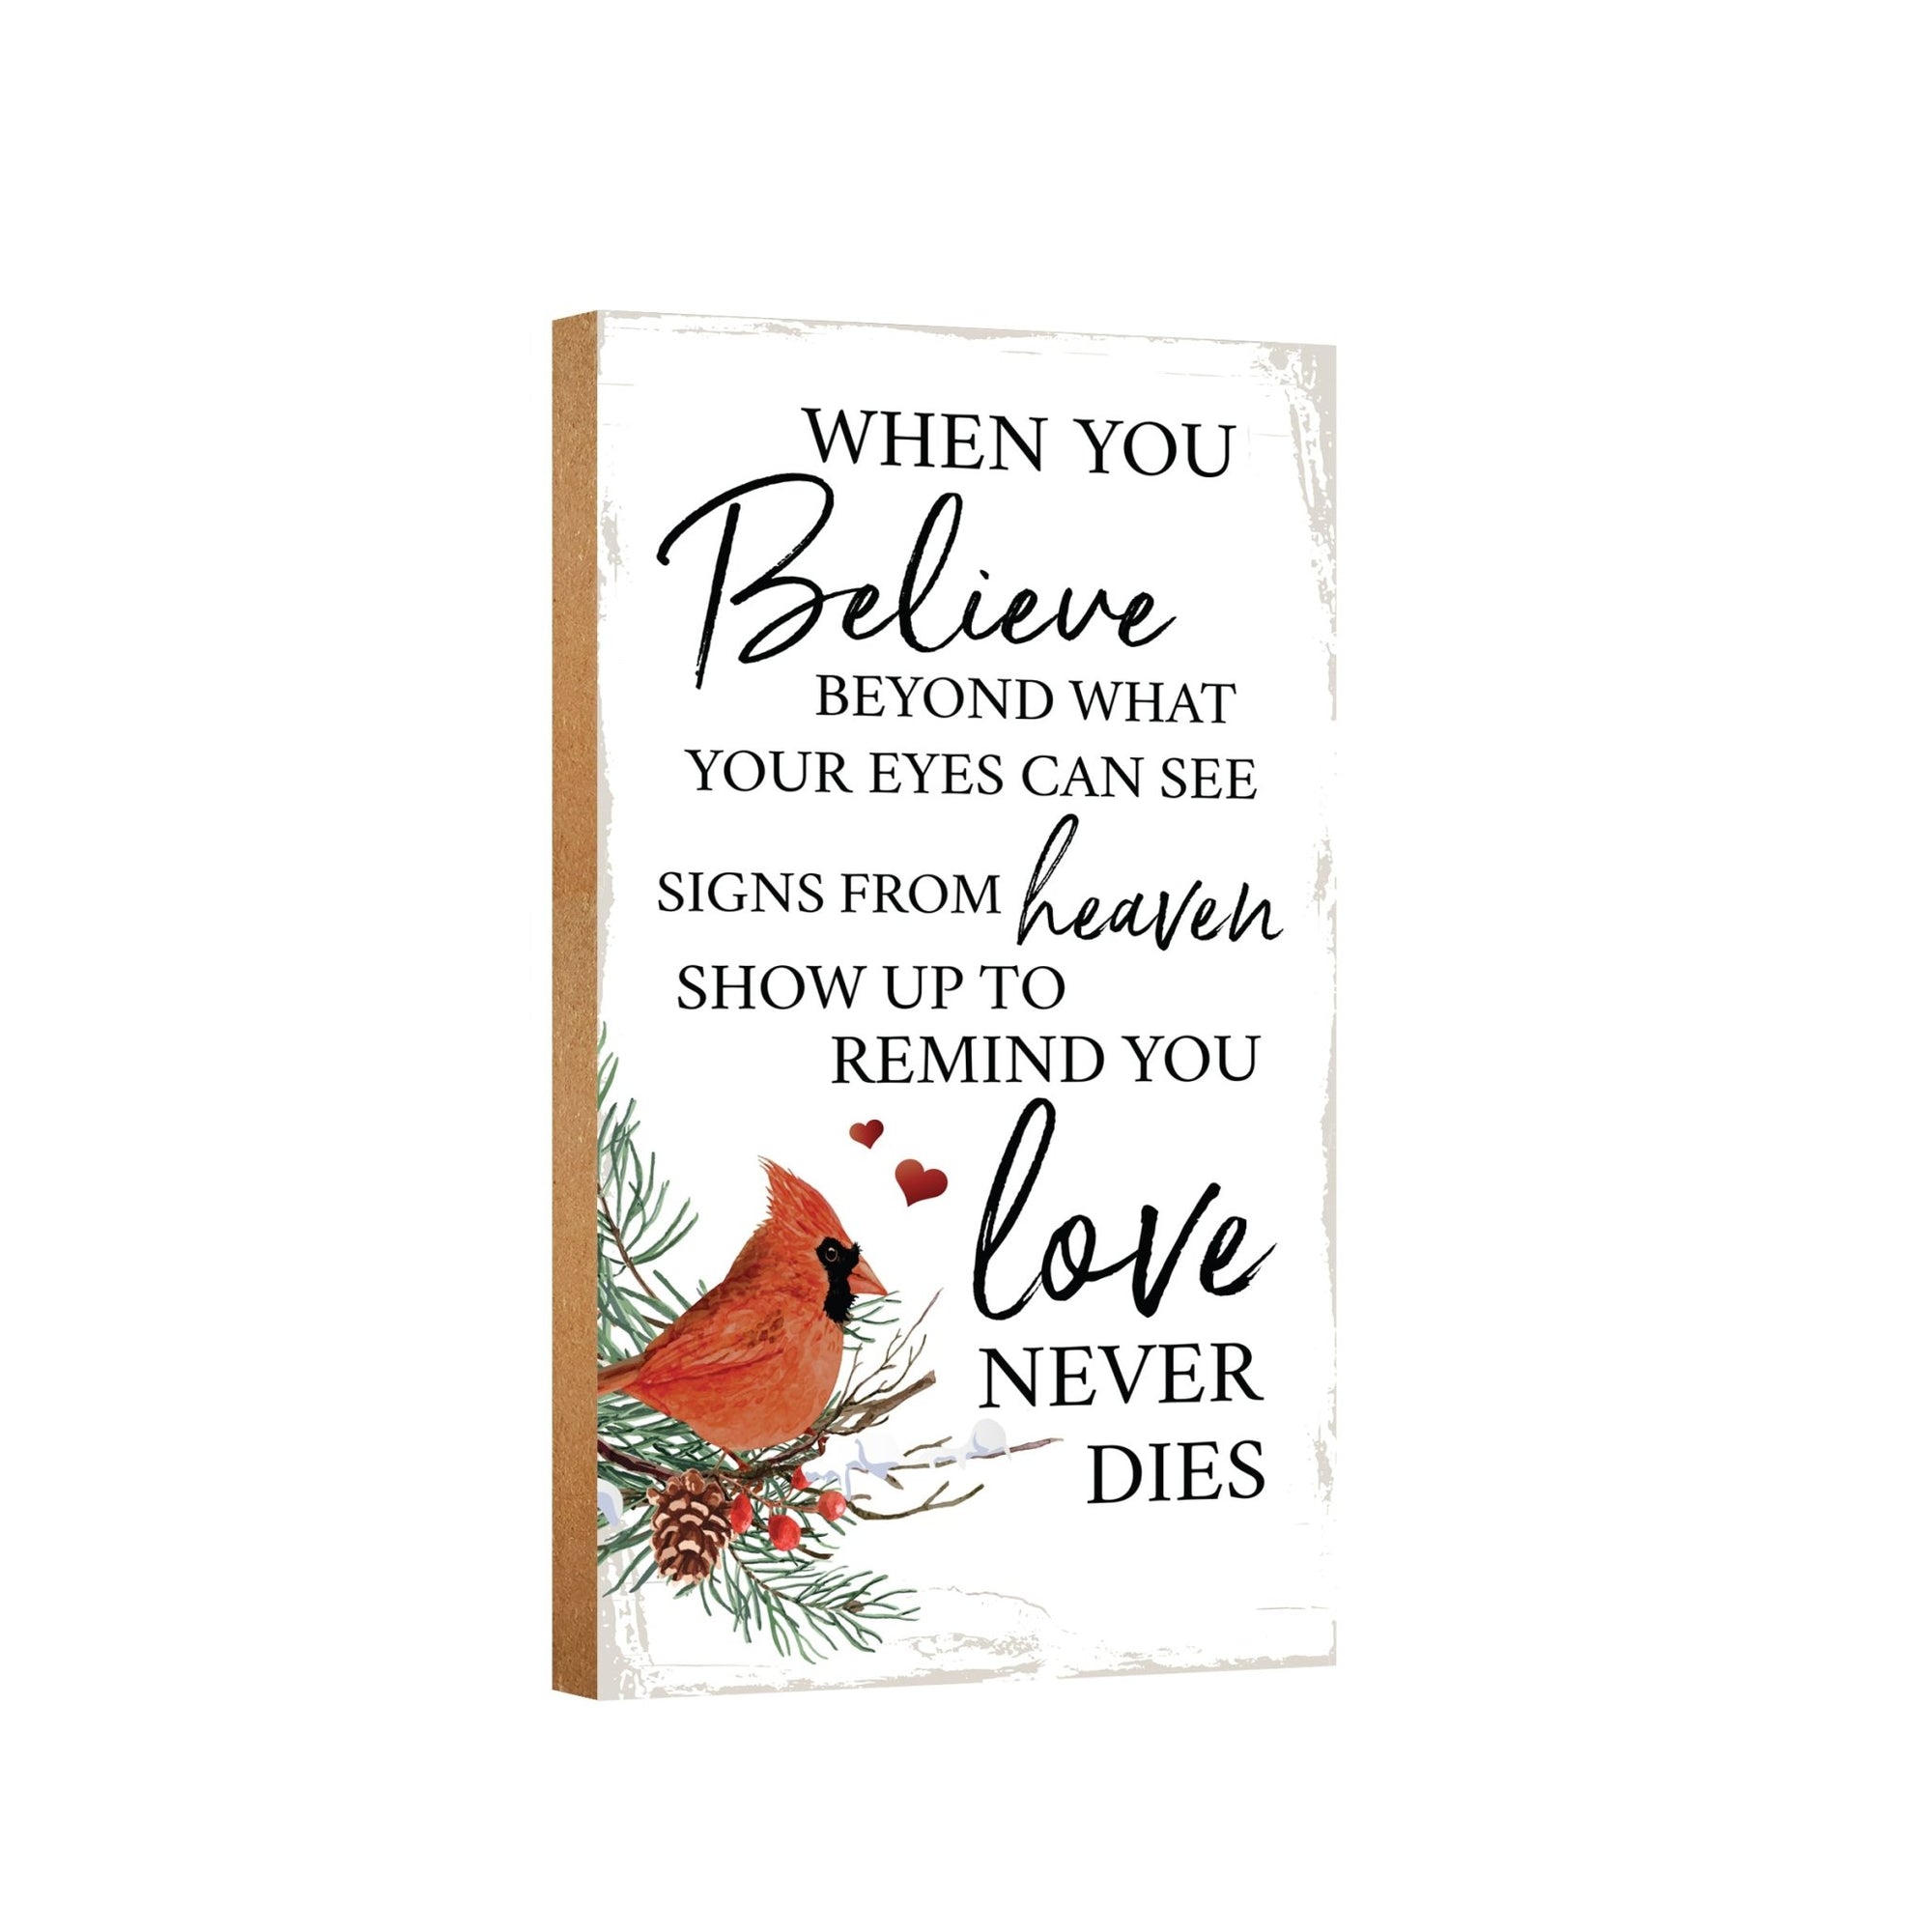 LifeSong Milestones Christmas Memorial Wooden Wall Plaque for Home Decor